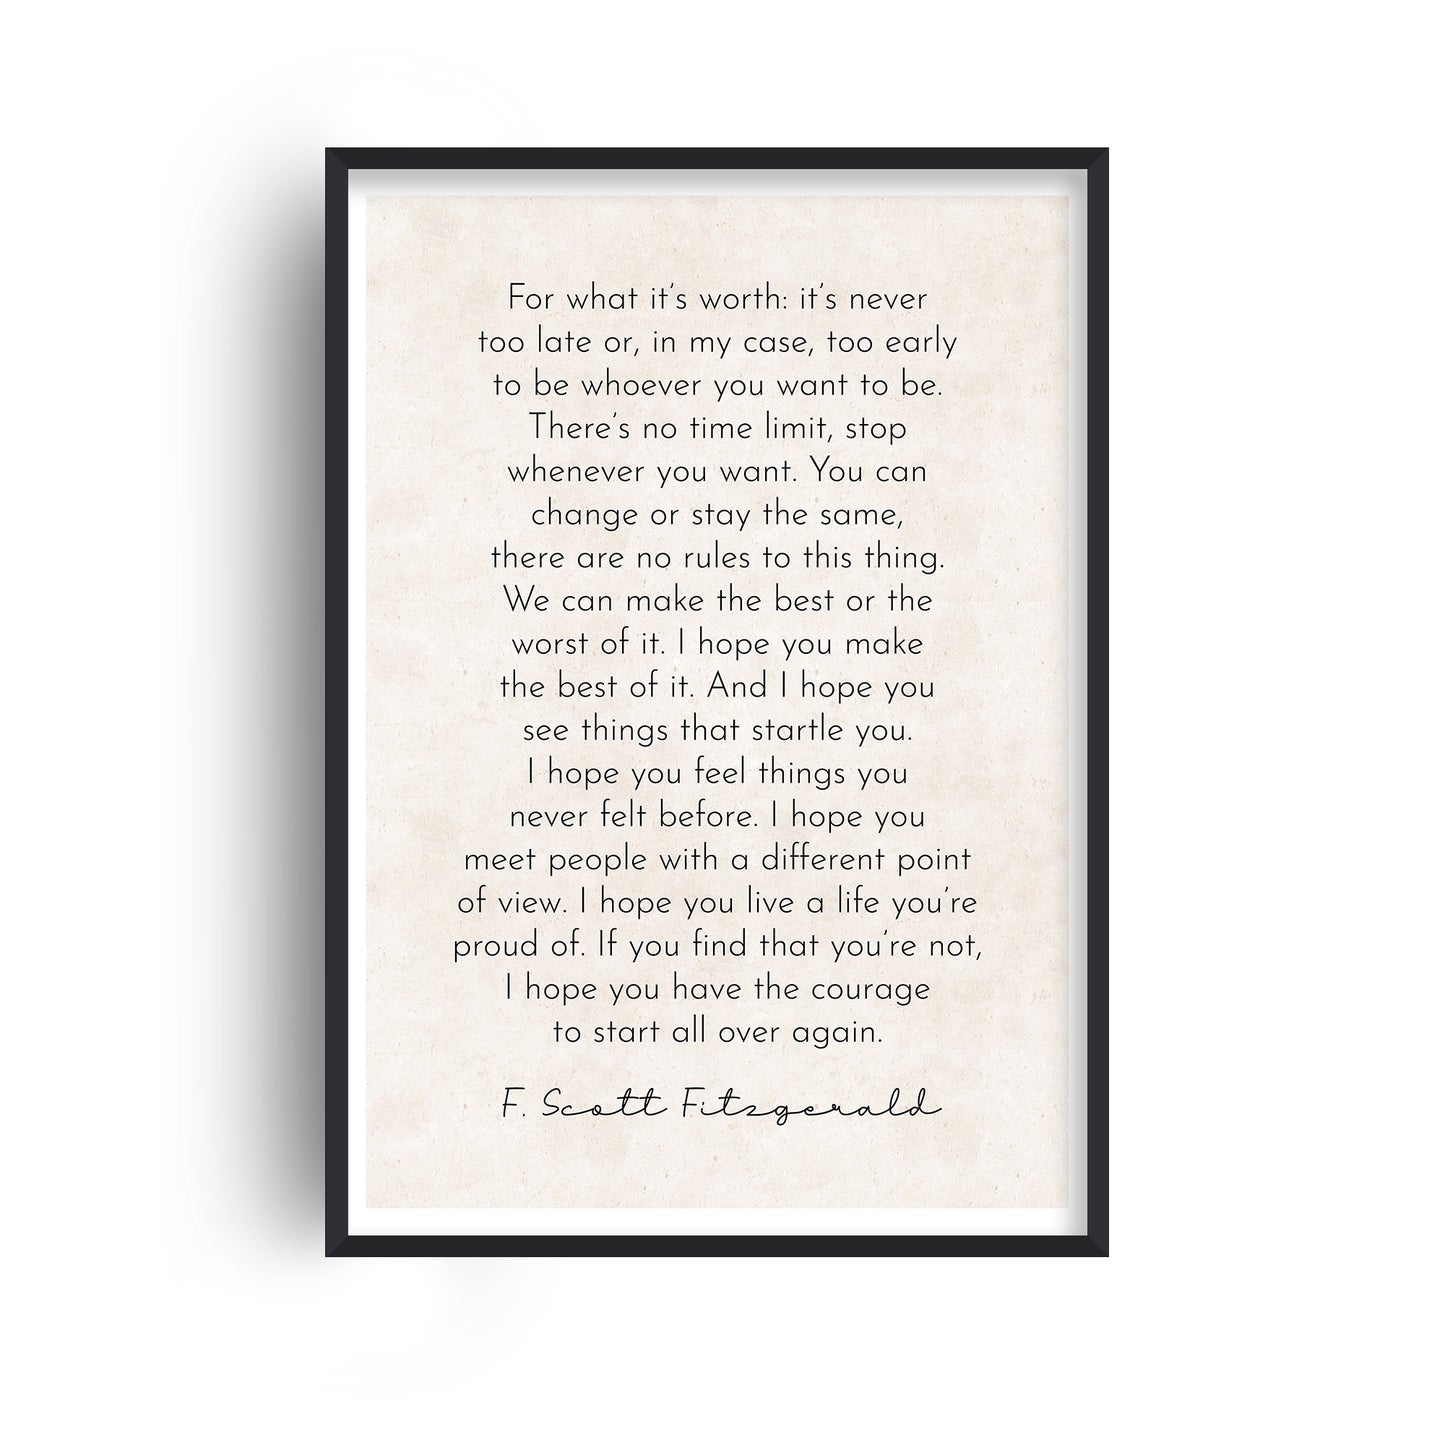 It's Never Too Late - Fitzgerald Quote Print